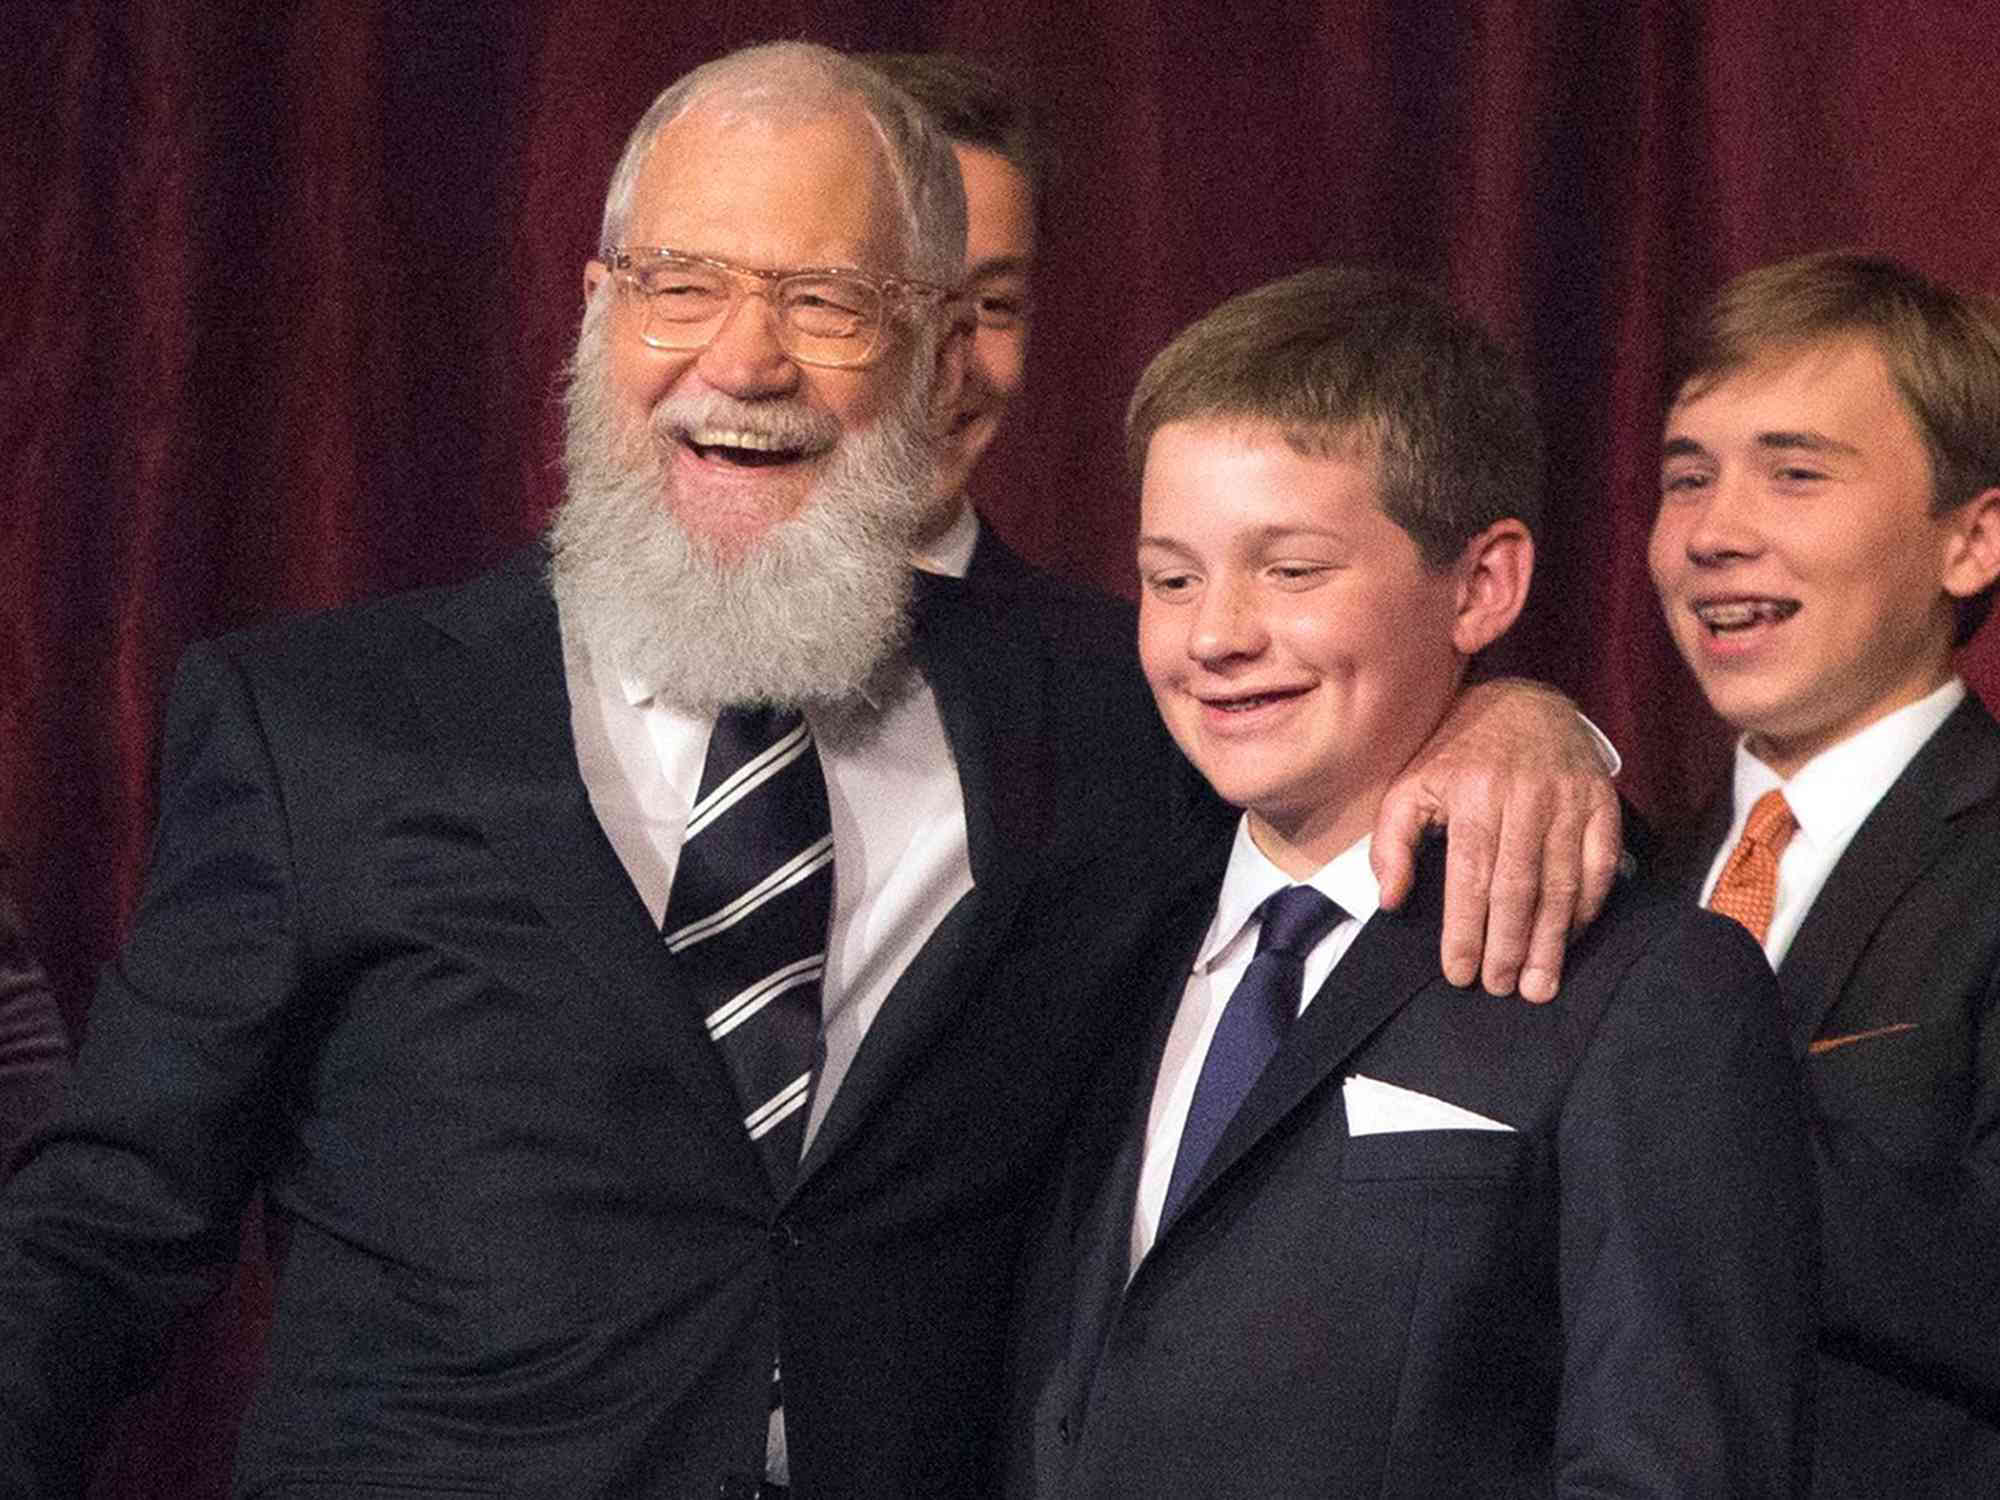 All About David Letterman’s Son Harry Letterman